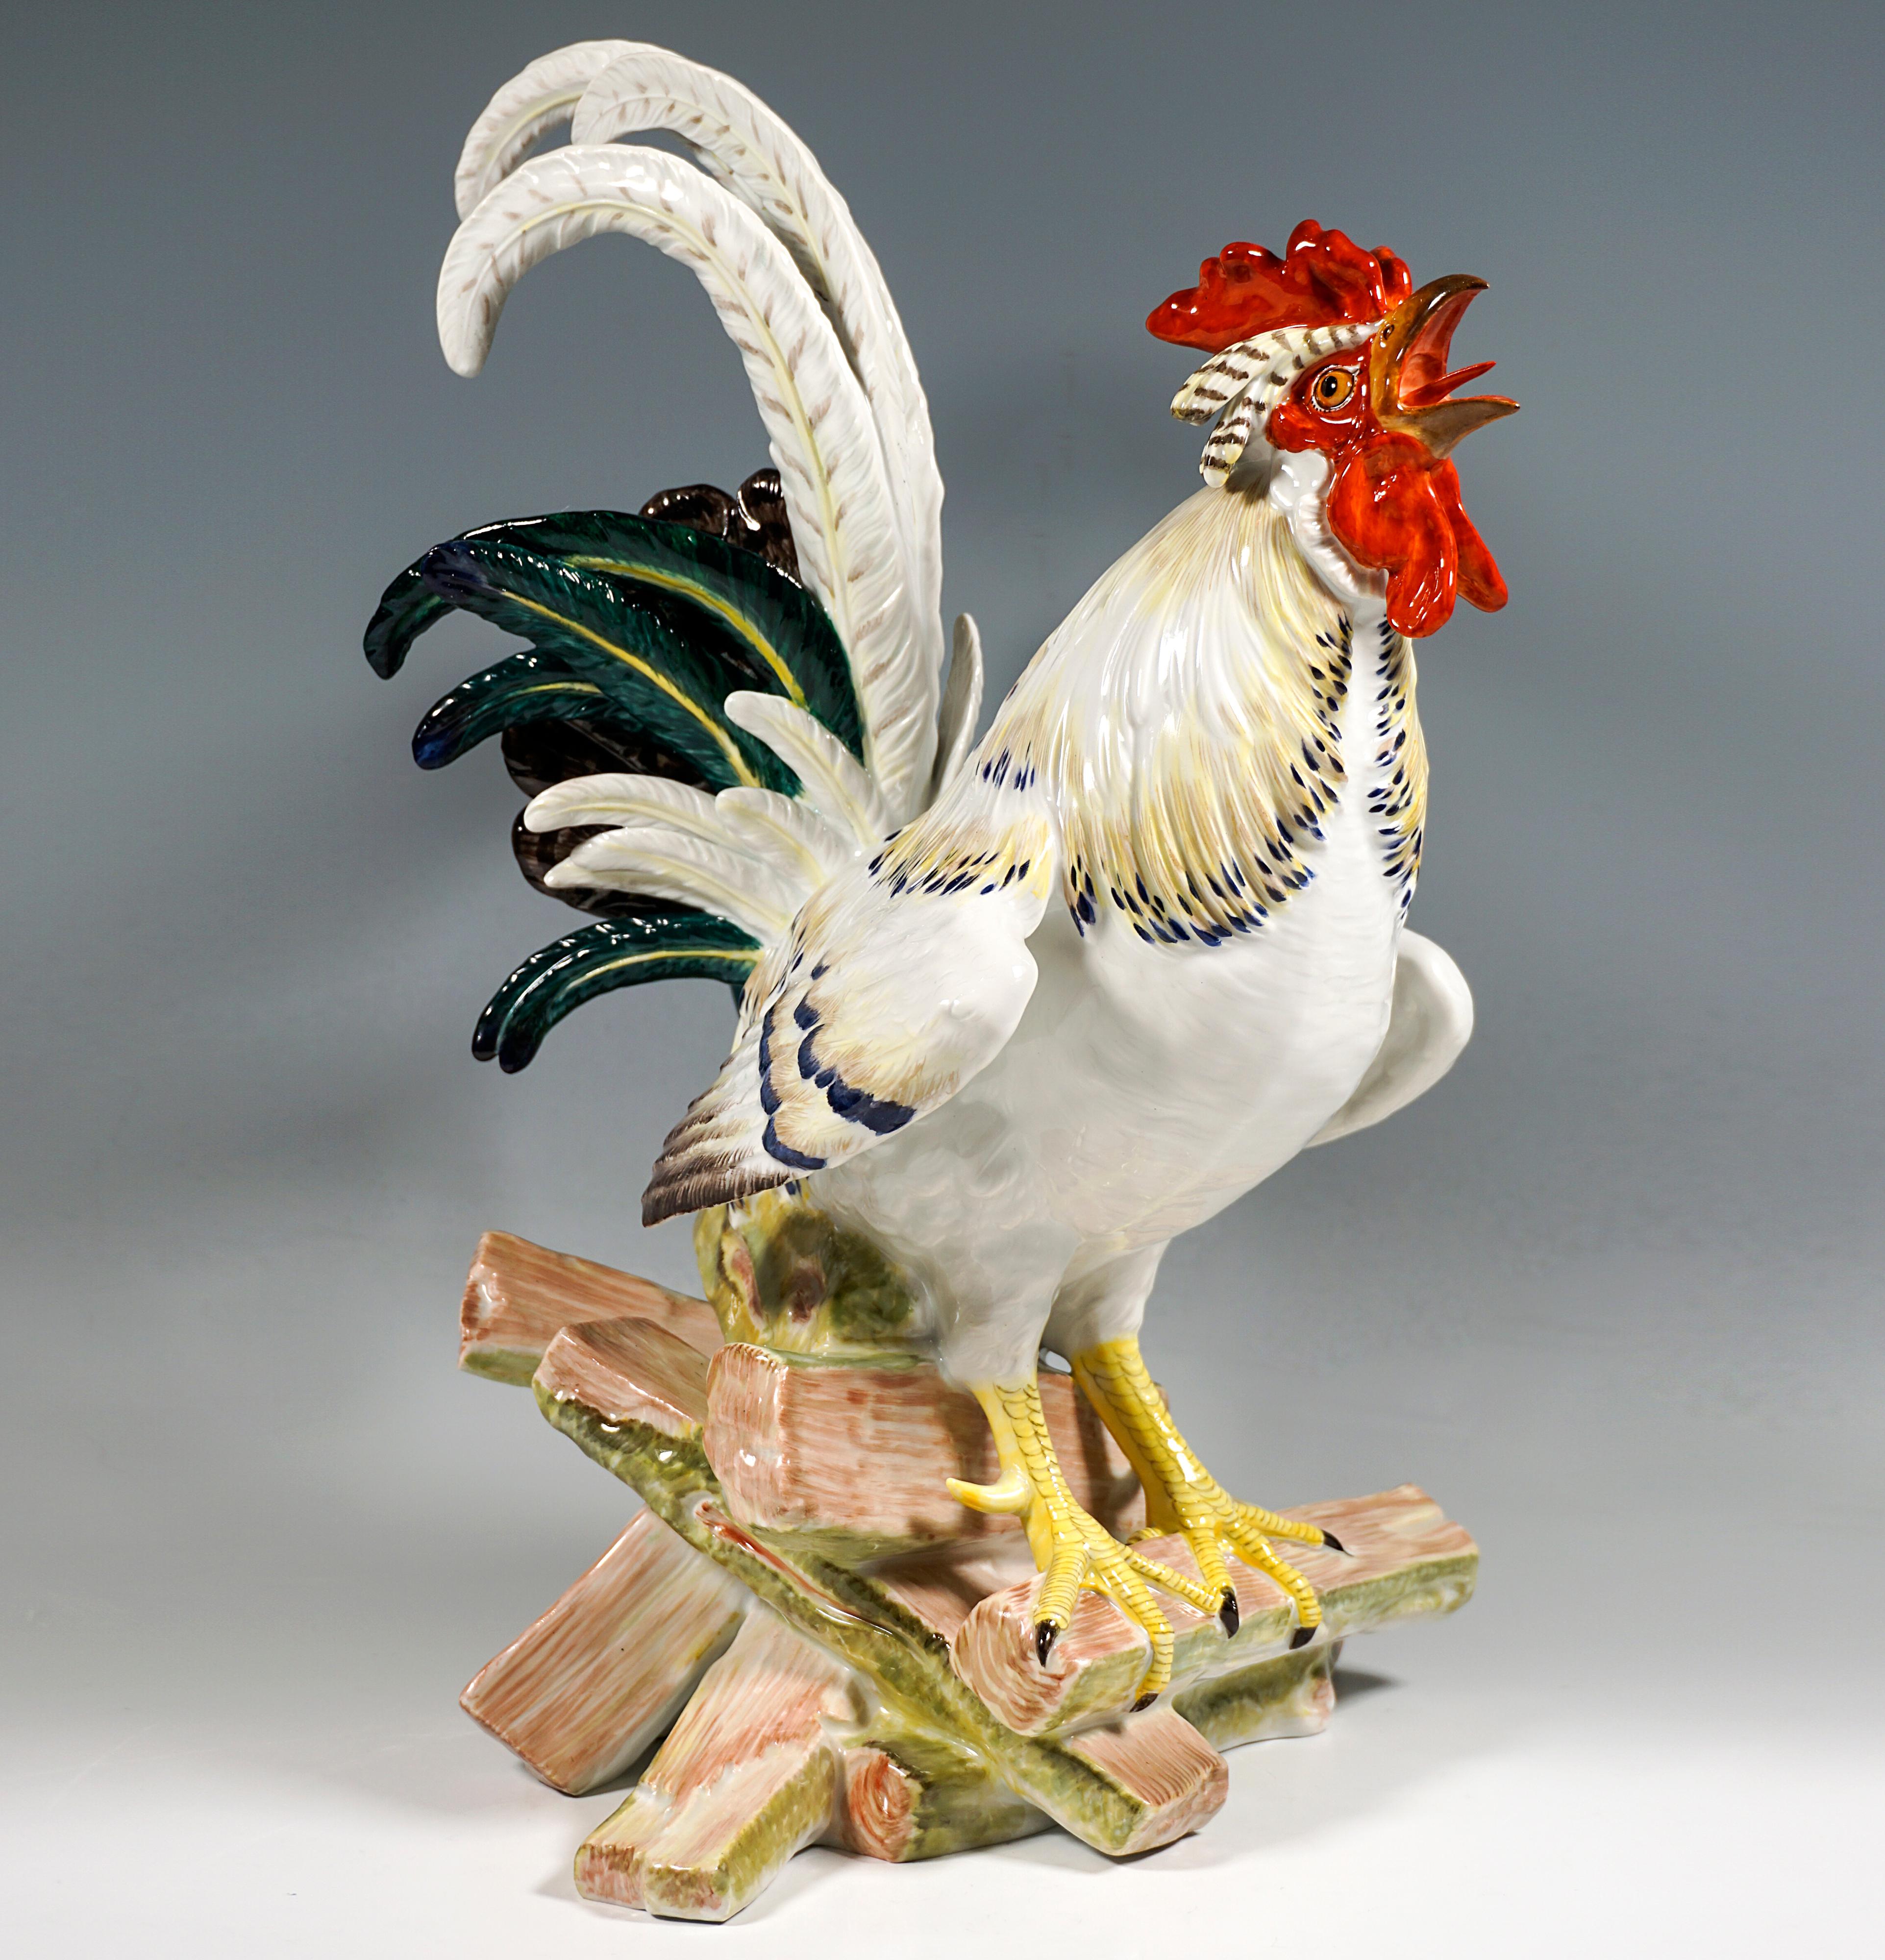 A life-size rooster crowing and sitting on a pile of wood in an extremely naturalistic depiction. Impressive due to its rich sculptural details and flawless, hand-painted staffage, the model is still part of Meissen's exclusive collection